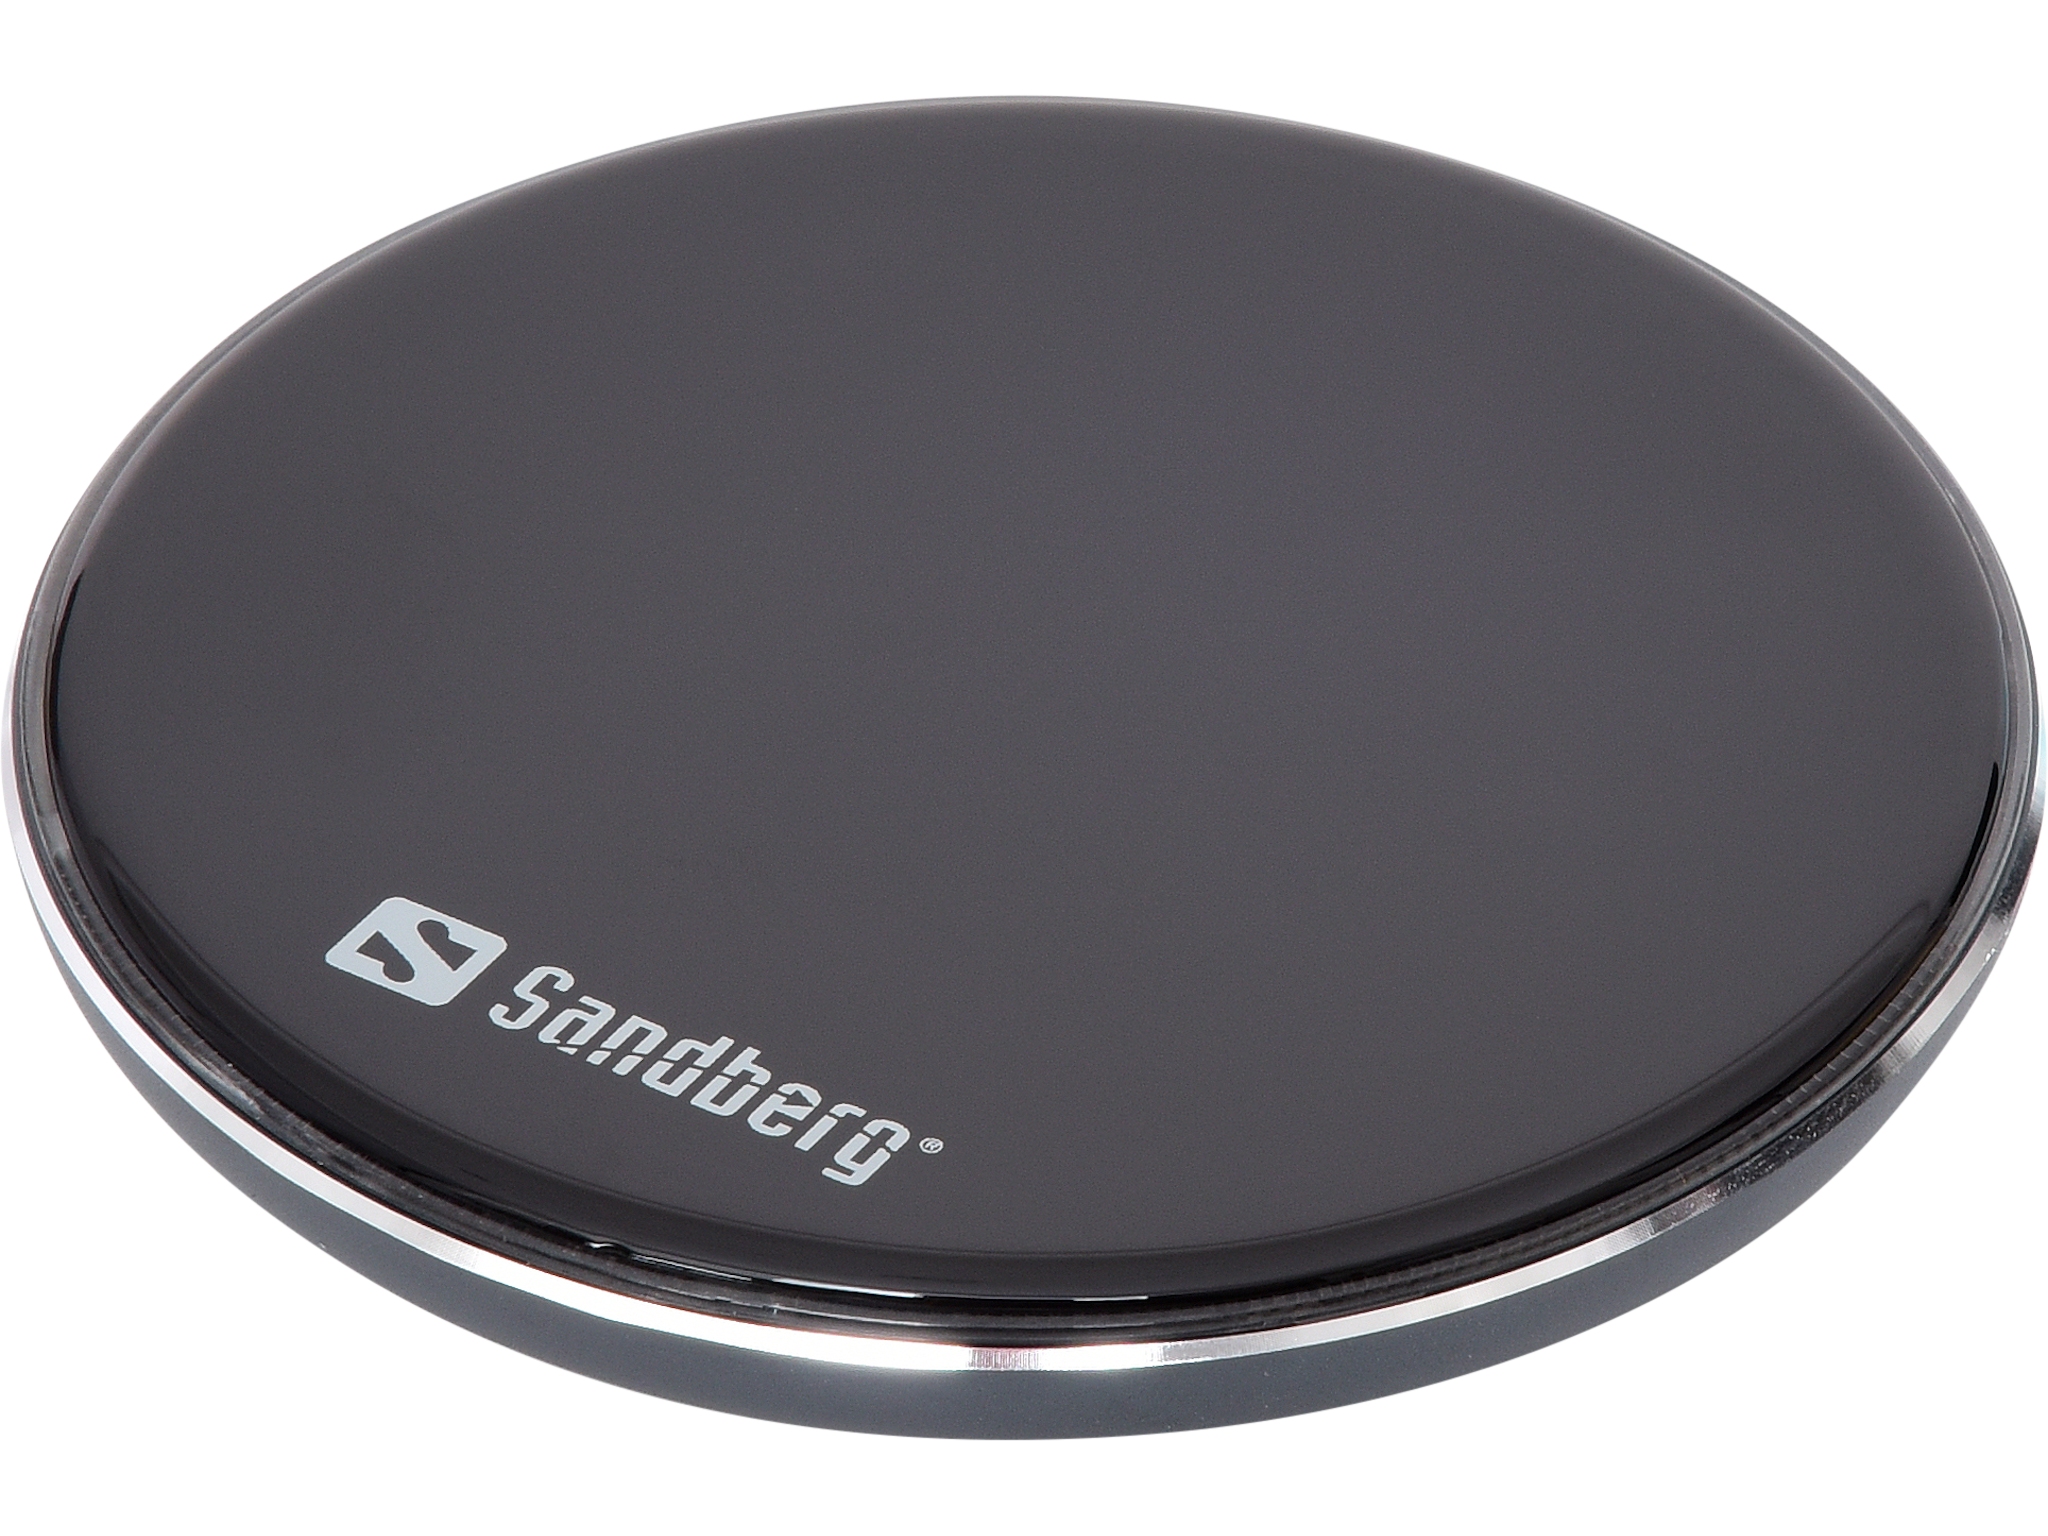 Реверсивная беспроводная зарядка. Беспроводная зарядка INTERSTEP 10w. Wireless Charger Pad Type. Buy Wireless Charger.